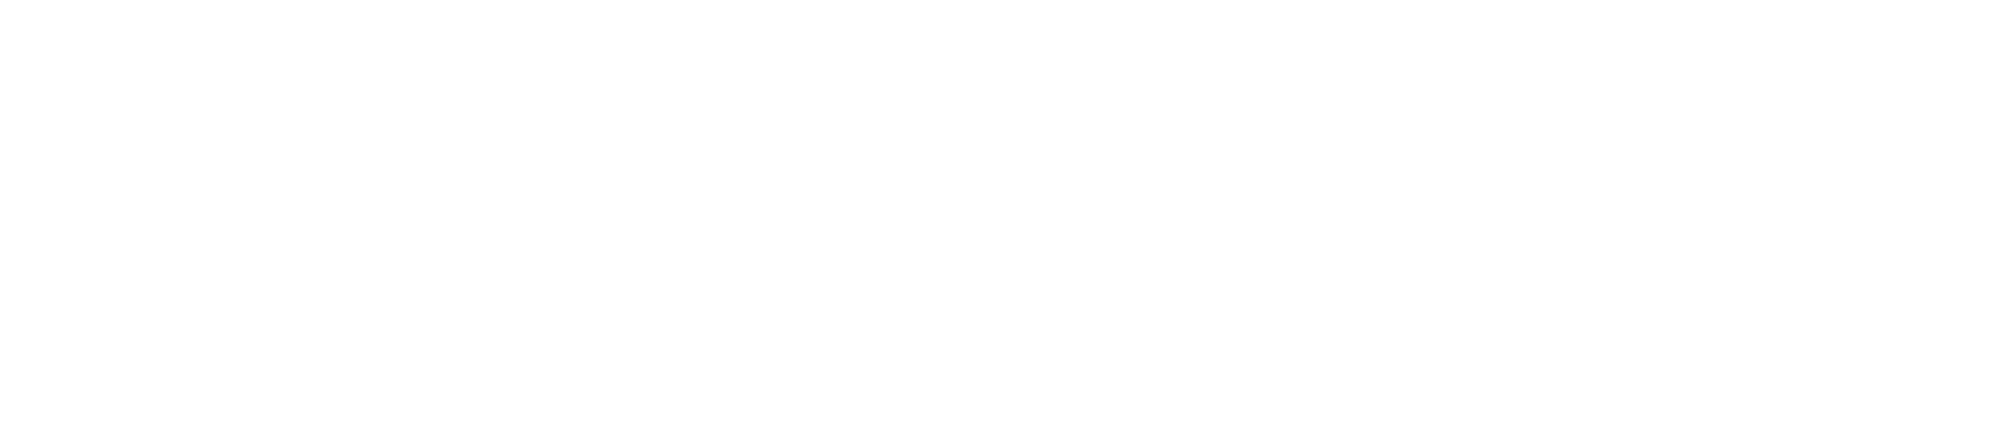 Tech & Justice Chronicles